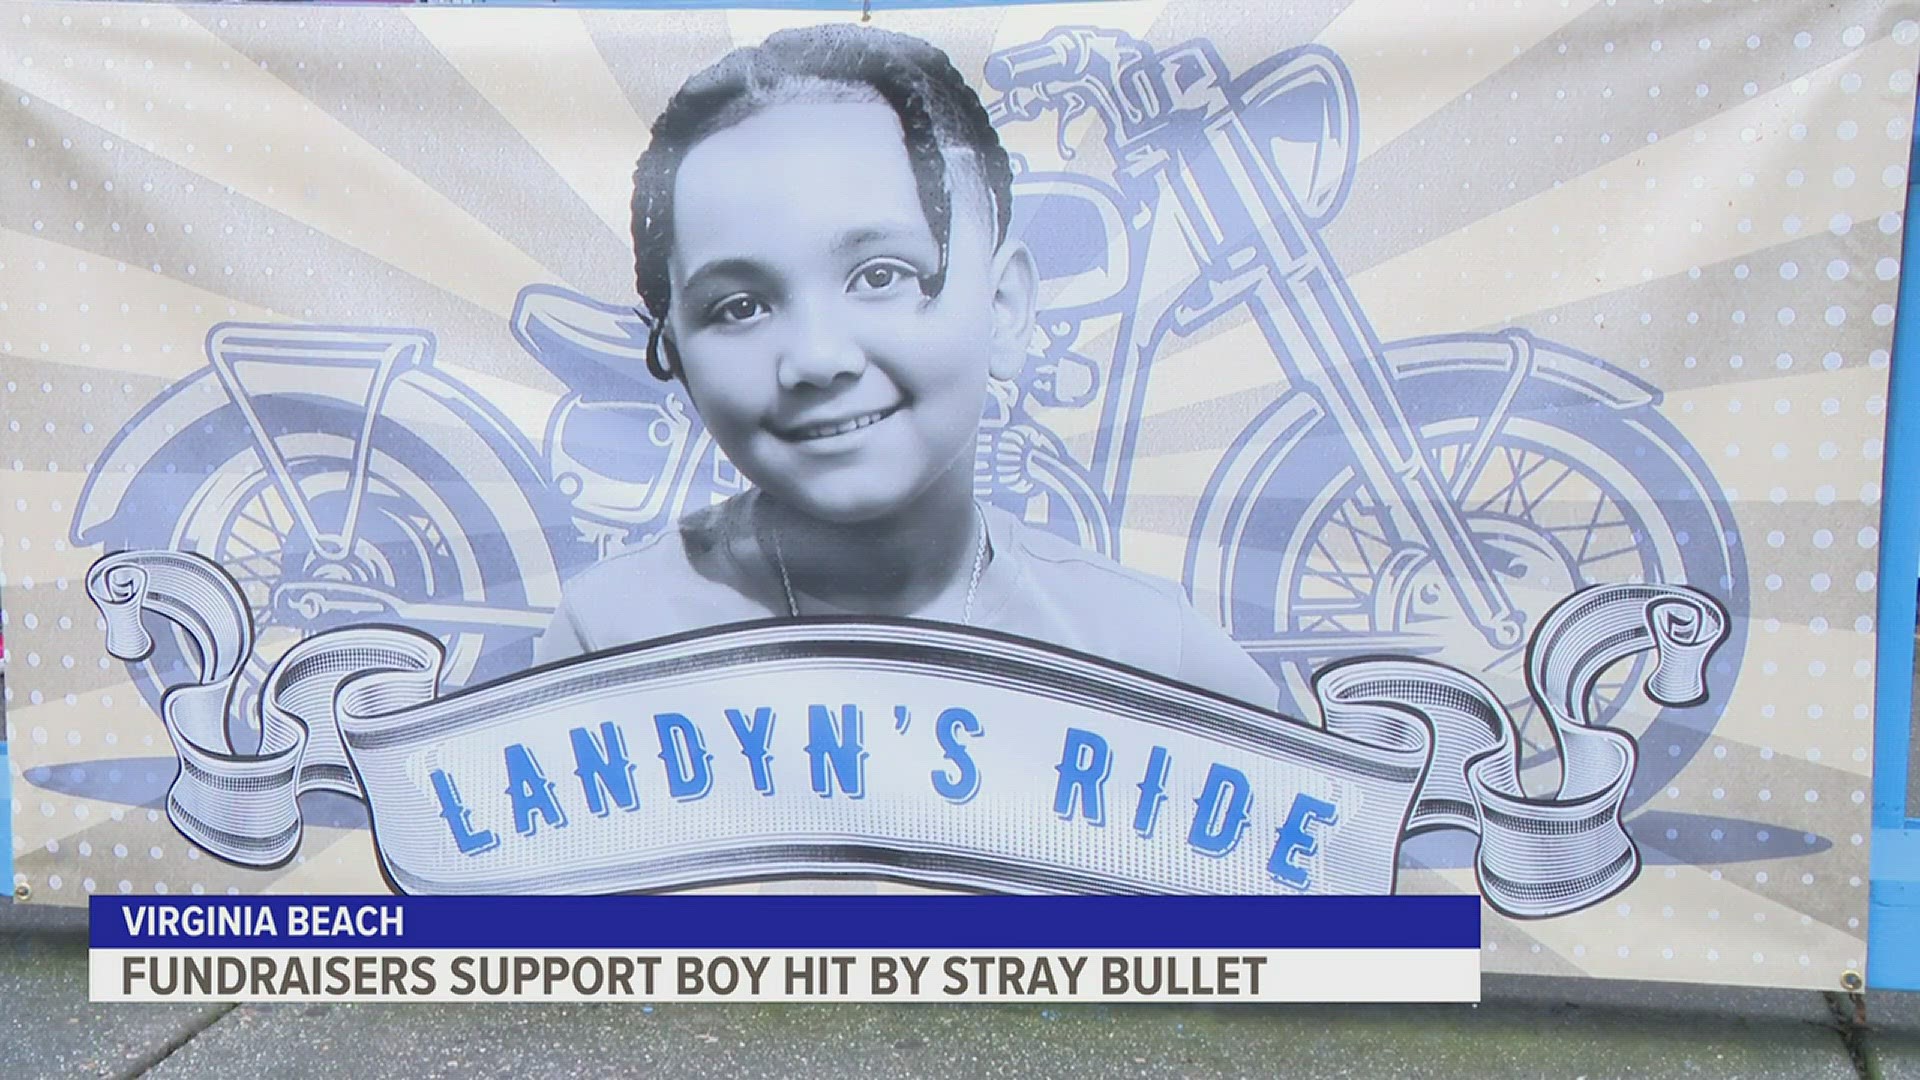 The community came together once again to show their support for little Landyn.